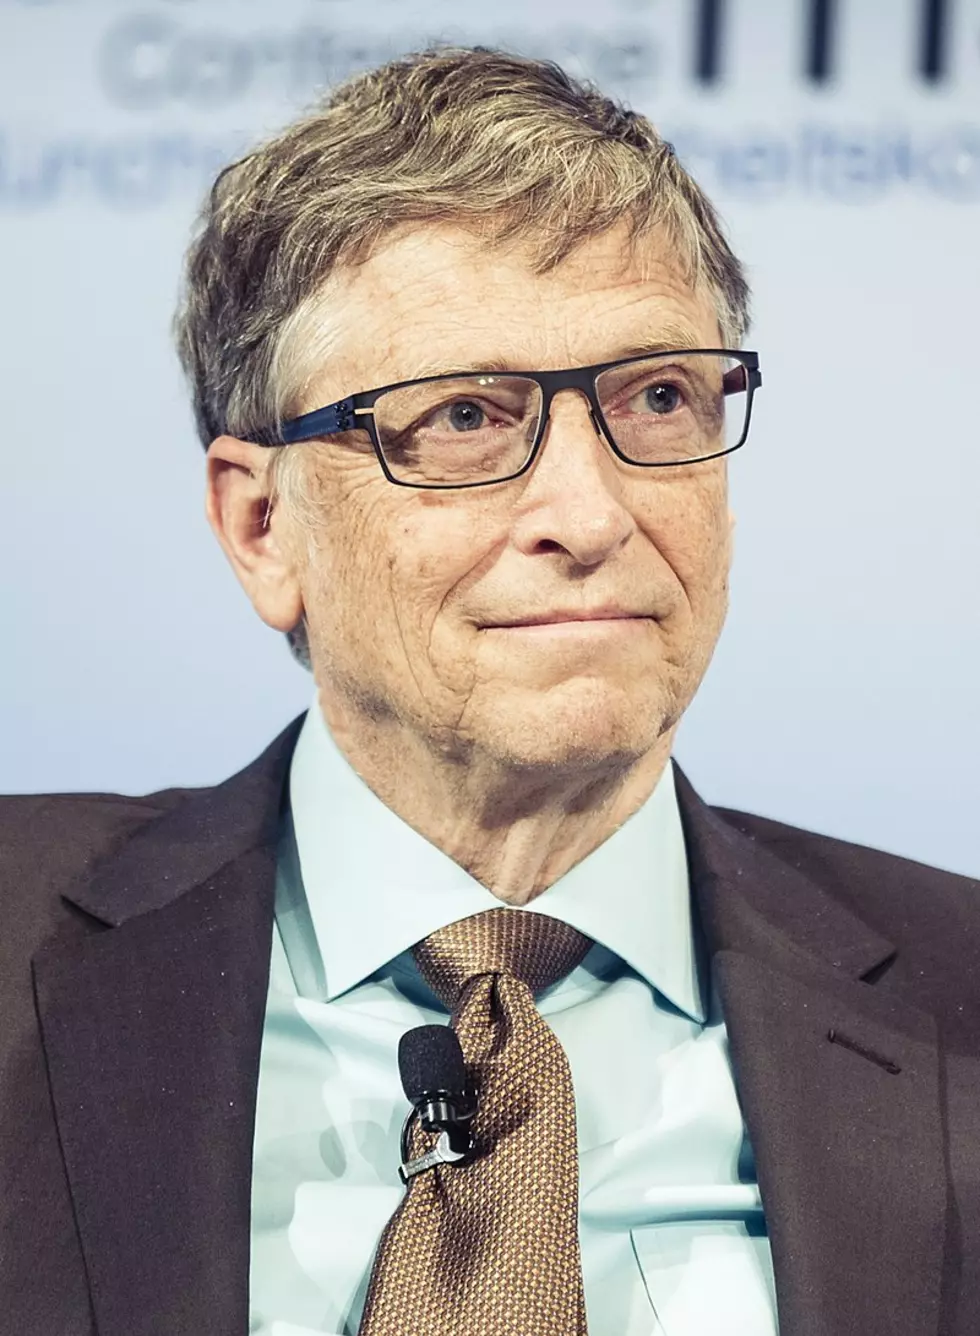 Bill Gates Not Sold on U.N. Climate Goals